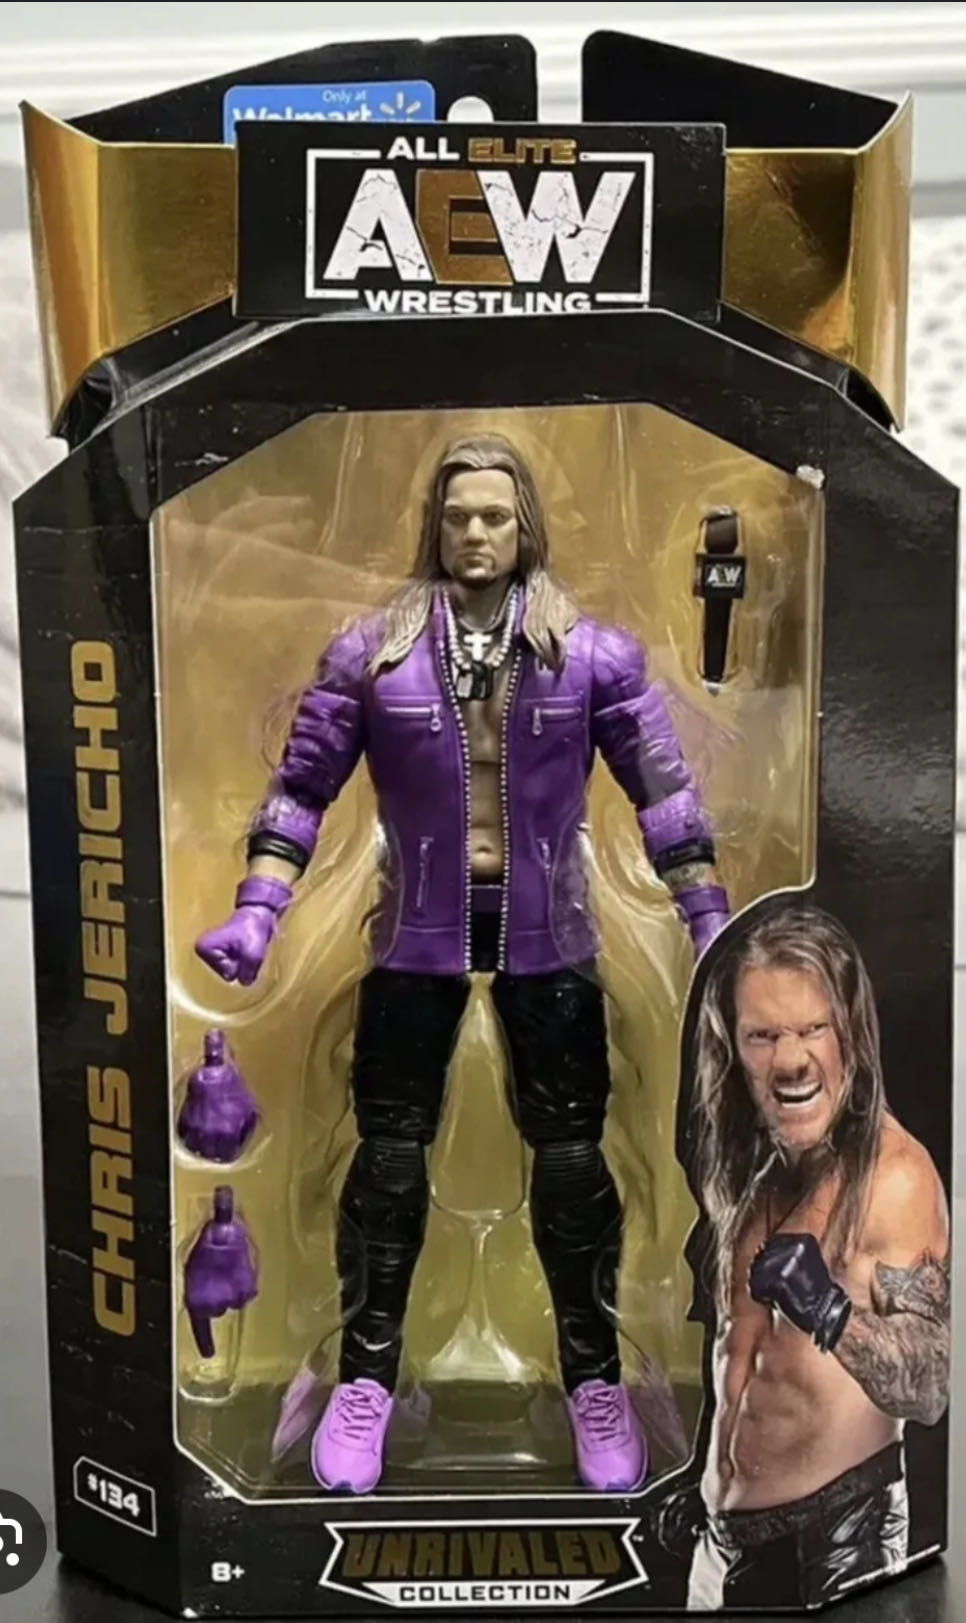 Chris Jericho - Jazwares AEW (AEW Unrivaled Collection) action figure collectible - Main Image 1